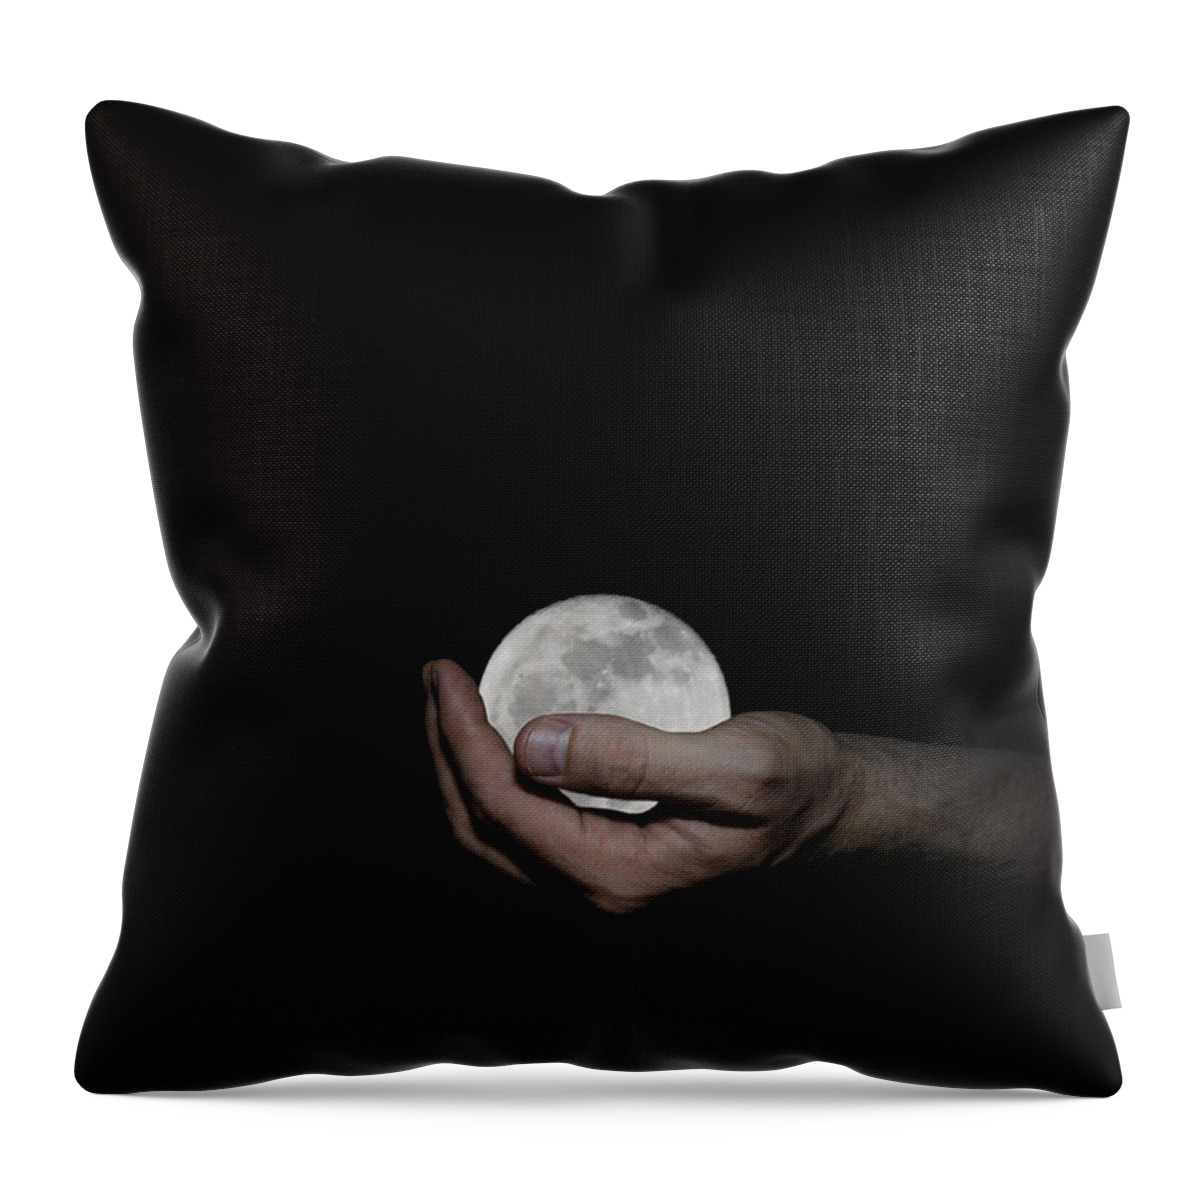 Whole Throw Pillow featuring the digital art You've Got the Whole Moon in Your Hand by Pelo Blanco Photo